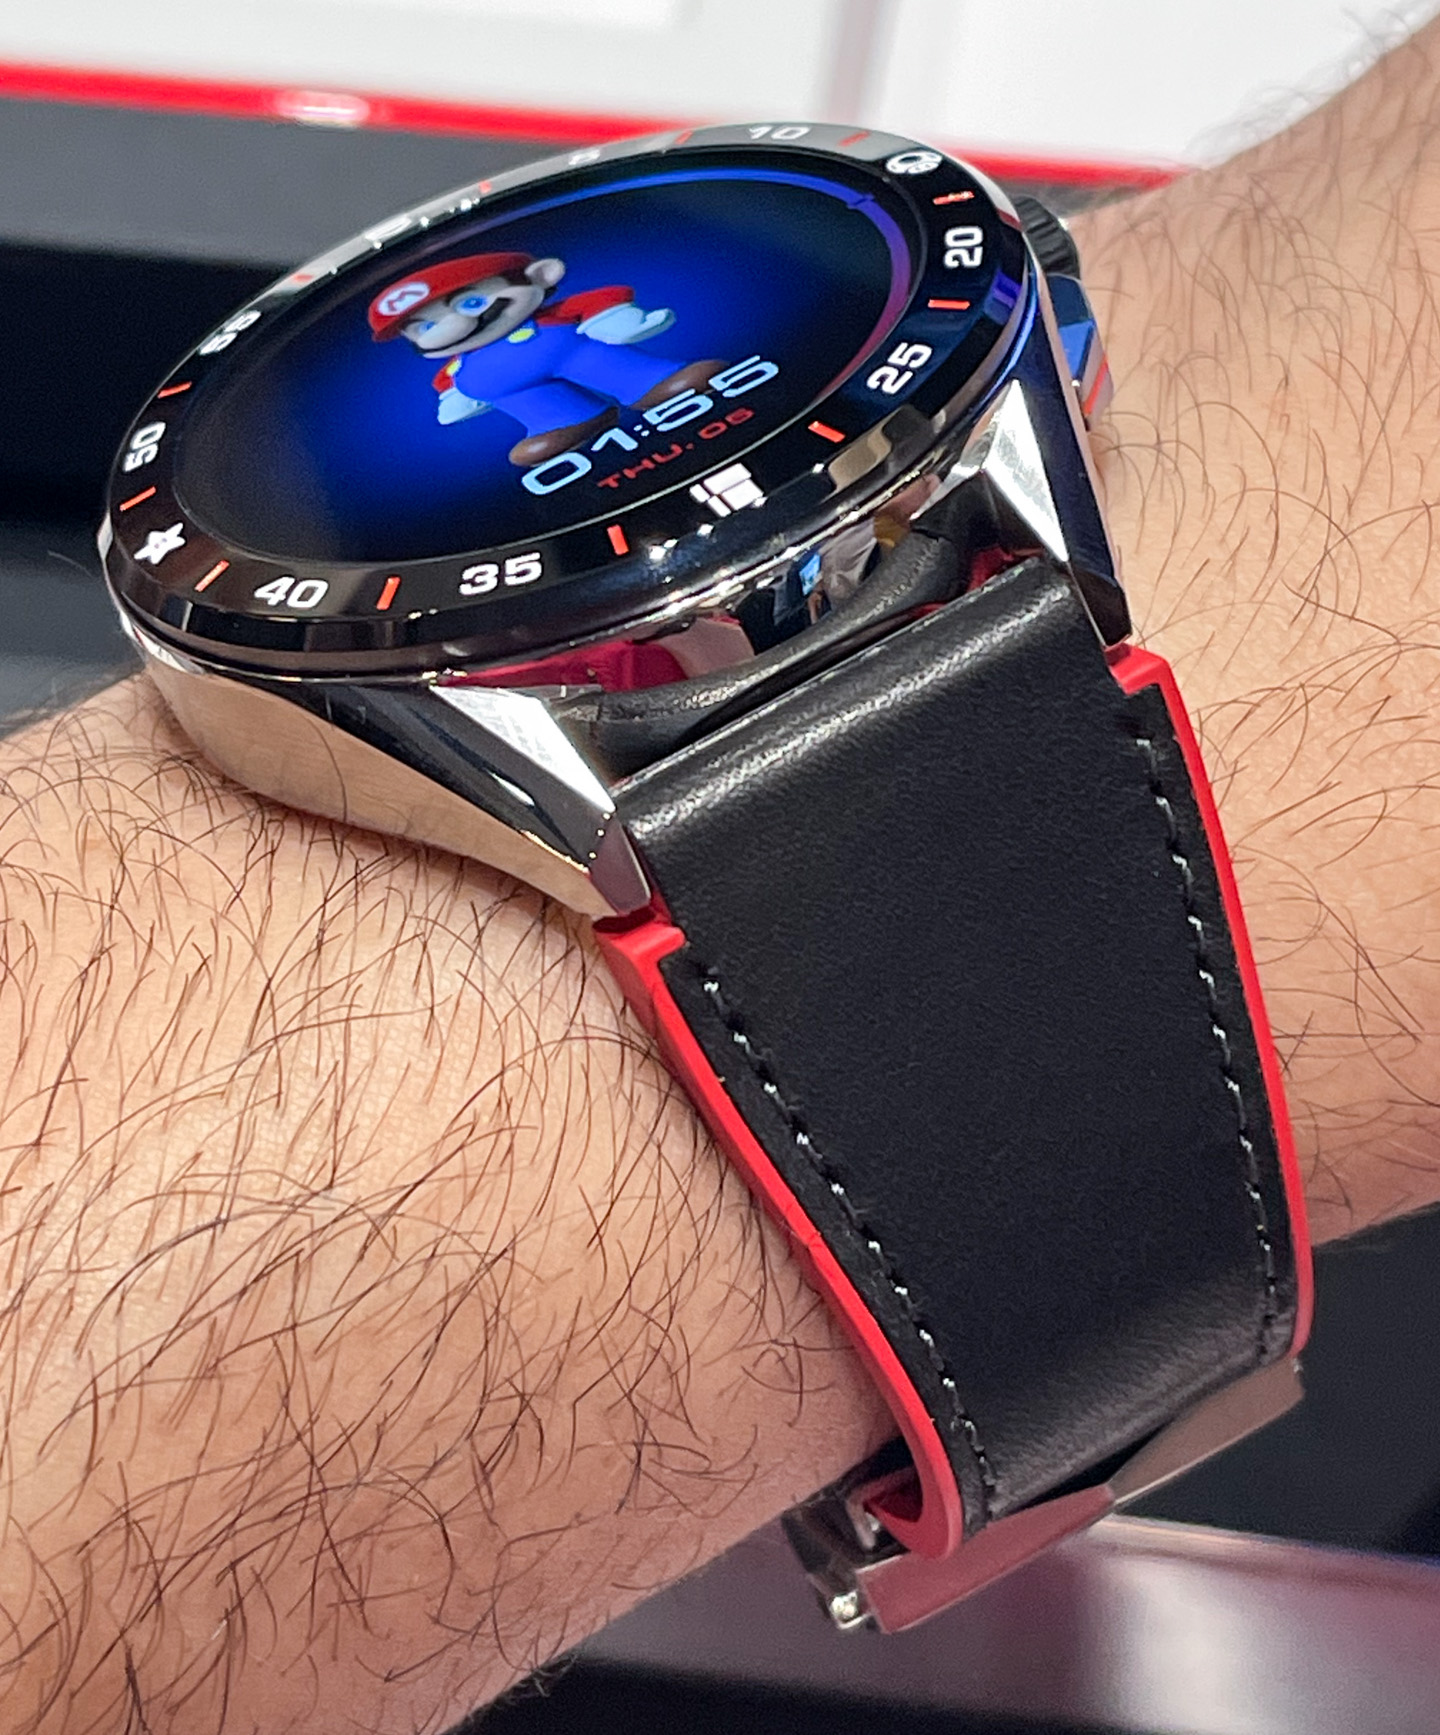 Is the TAG Heuer Super Mario smartwatch a good value?